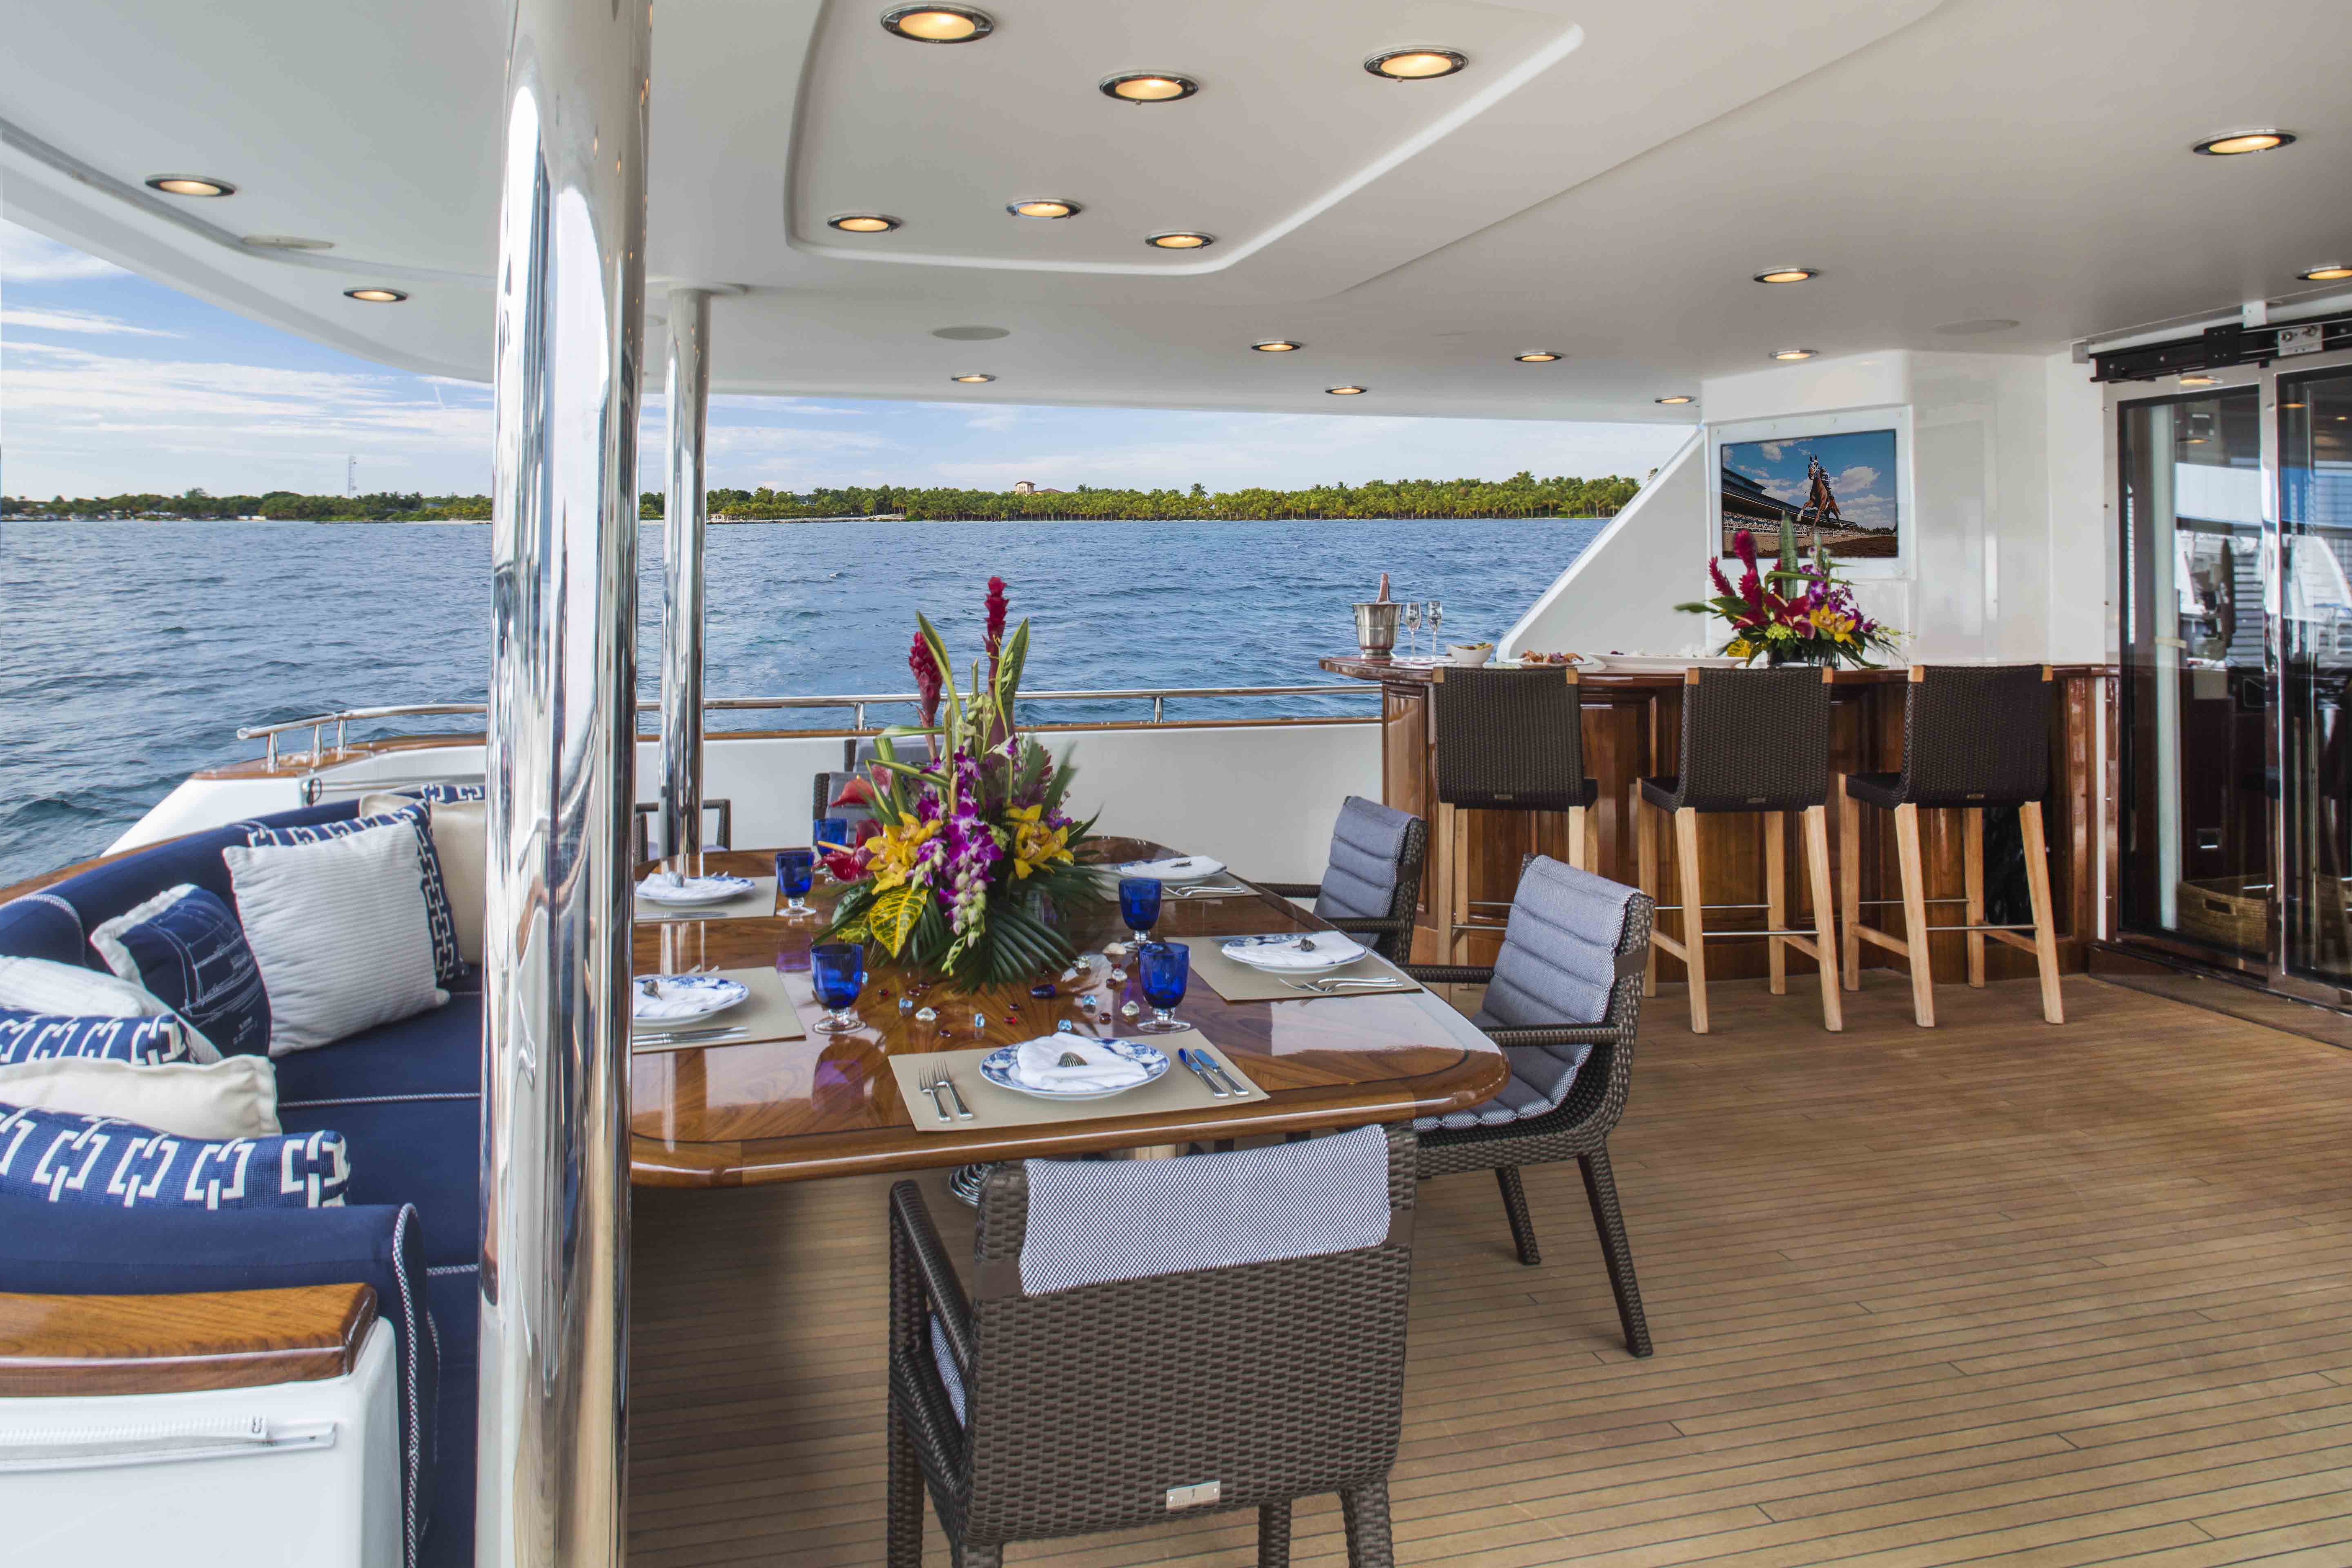 MY PLAN A - Aft deck dining and bar